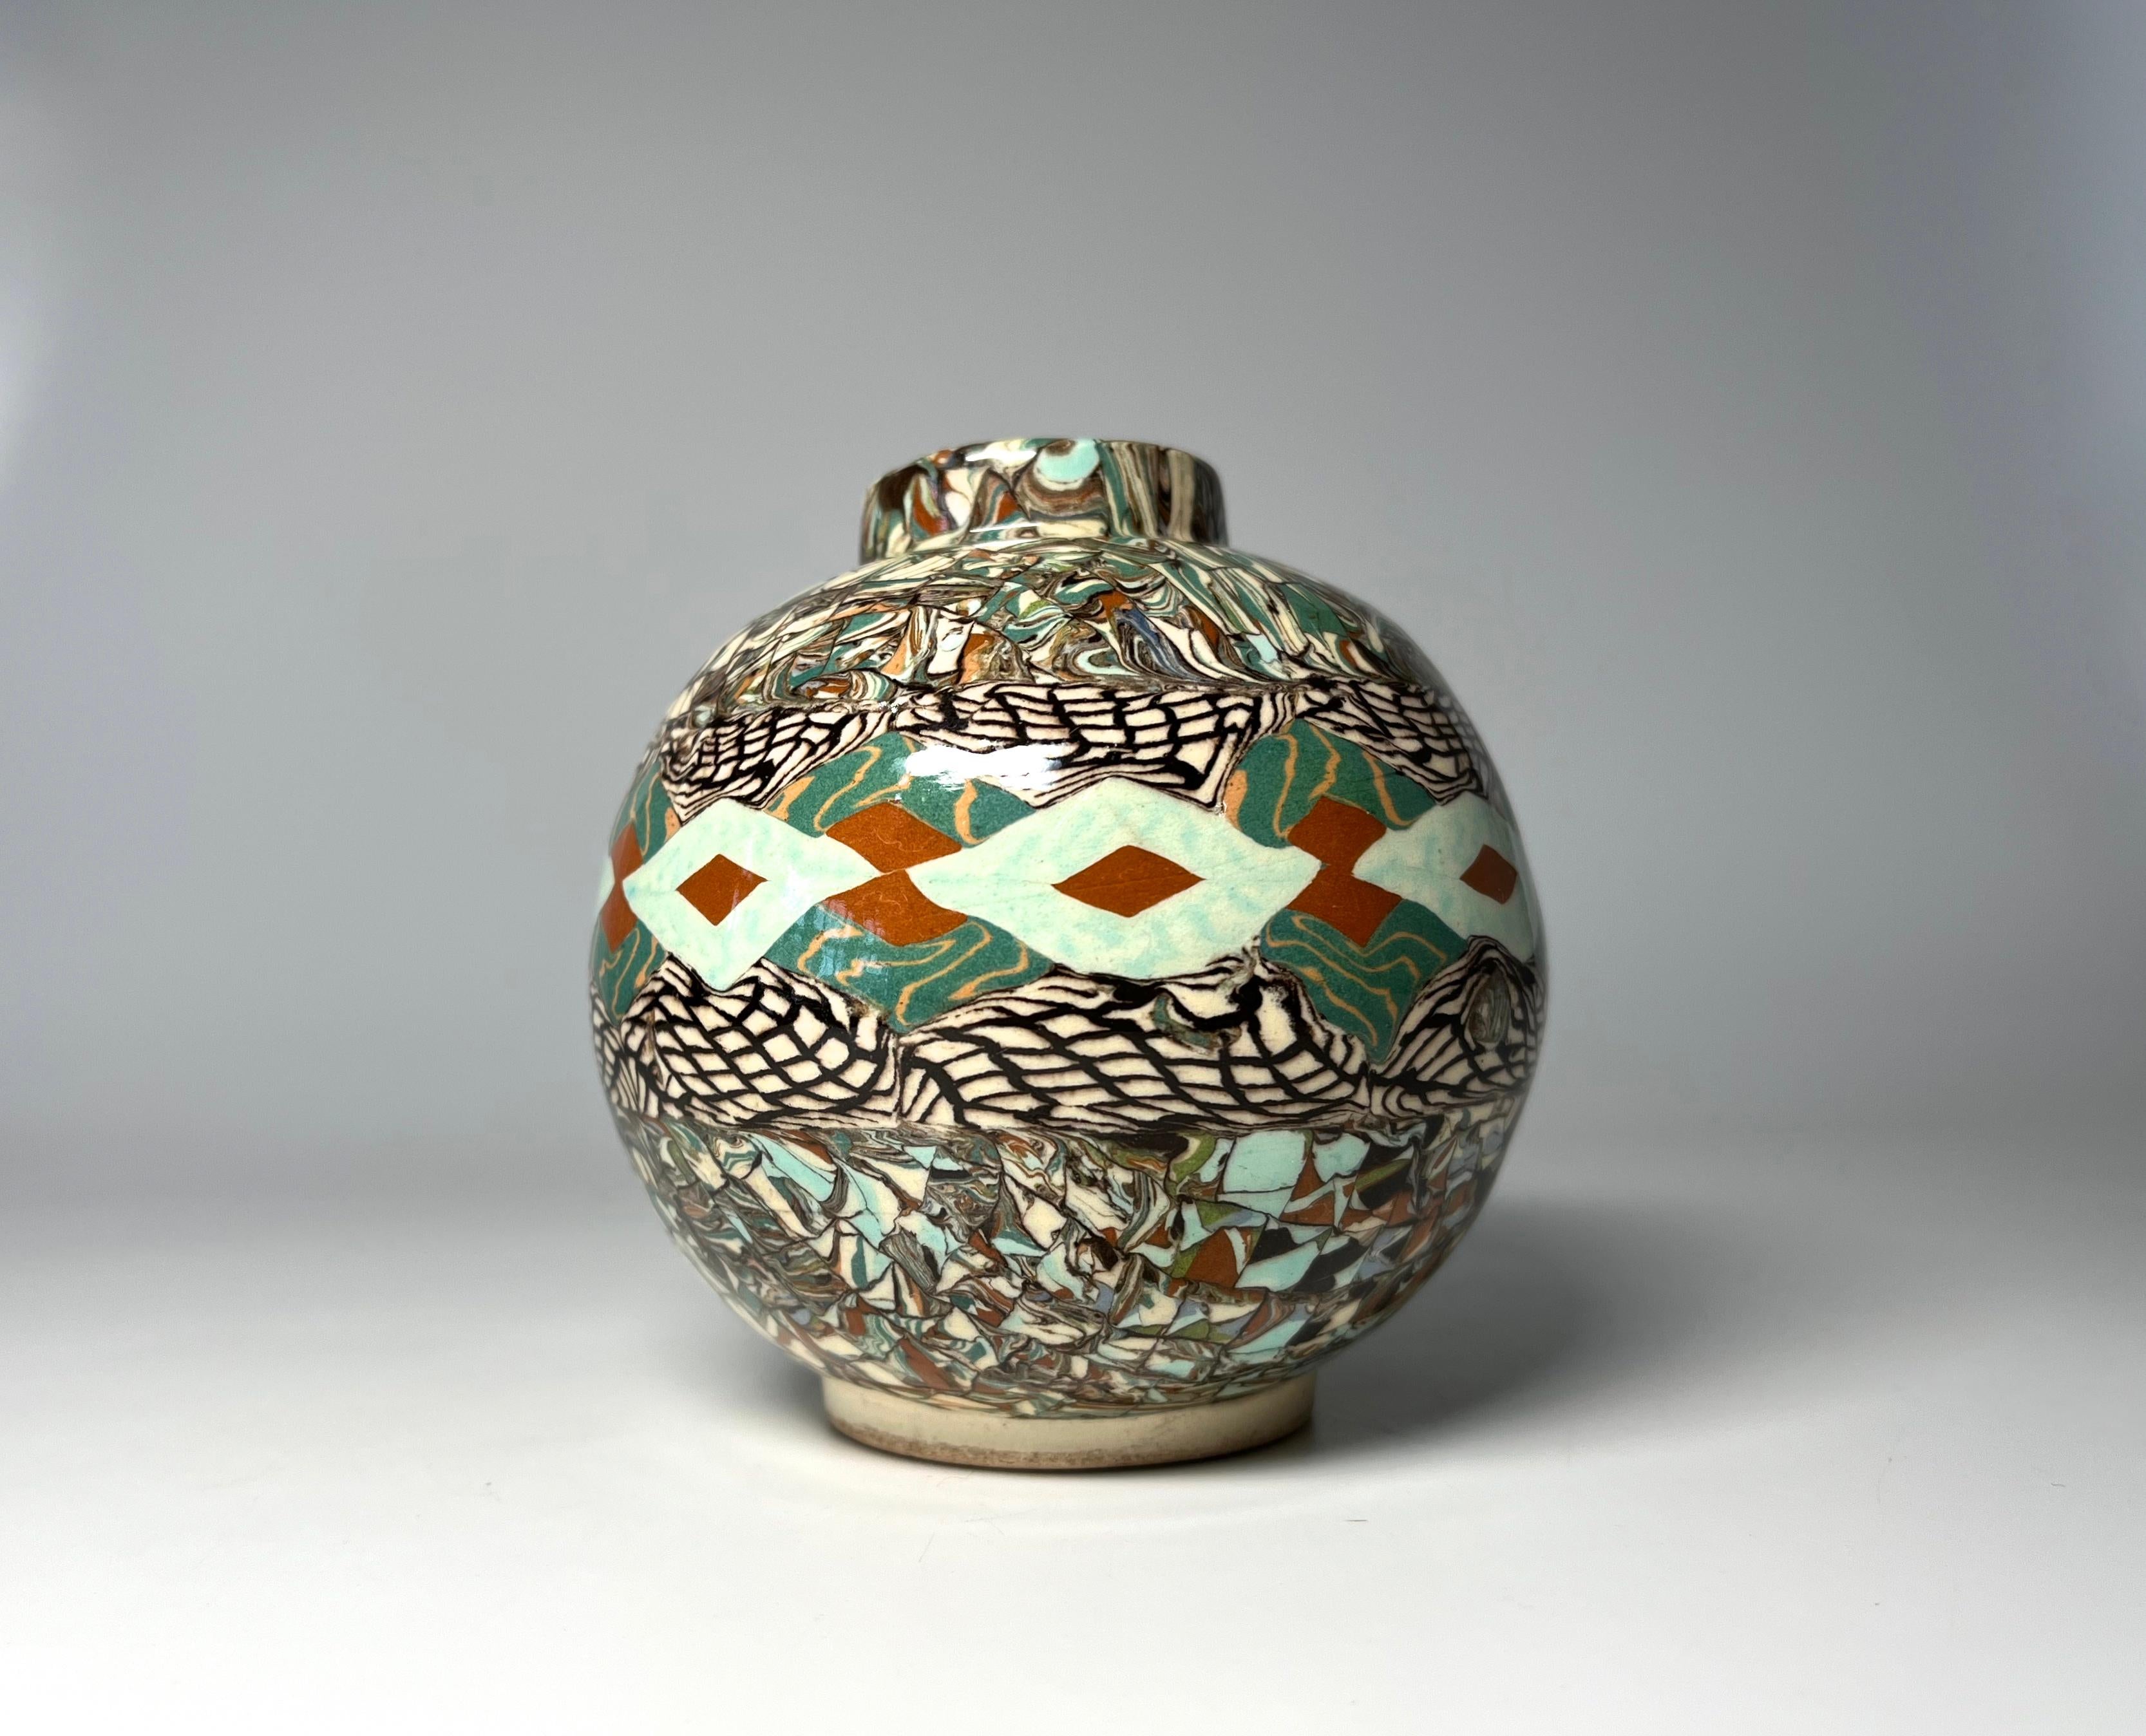 Jean Gerbino for Vallauris, France, ceramic glazed pale green and terracotta  mosaic vase 
Gerbino uses the Neriage technique to attain such intriguing patterns 
Circa 1960's
Signed Gerbino  to base
Height 3.75 inch, Diameter 3.5 inch, 
In very good